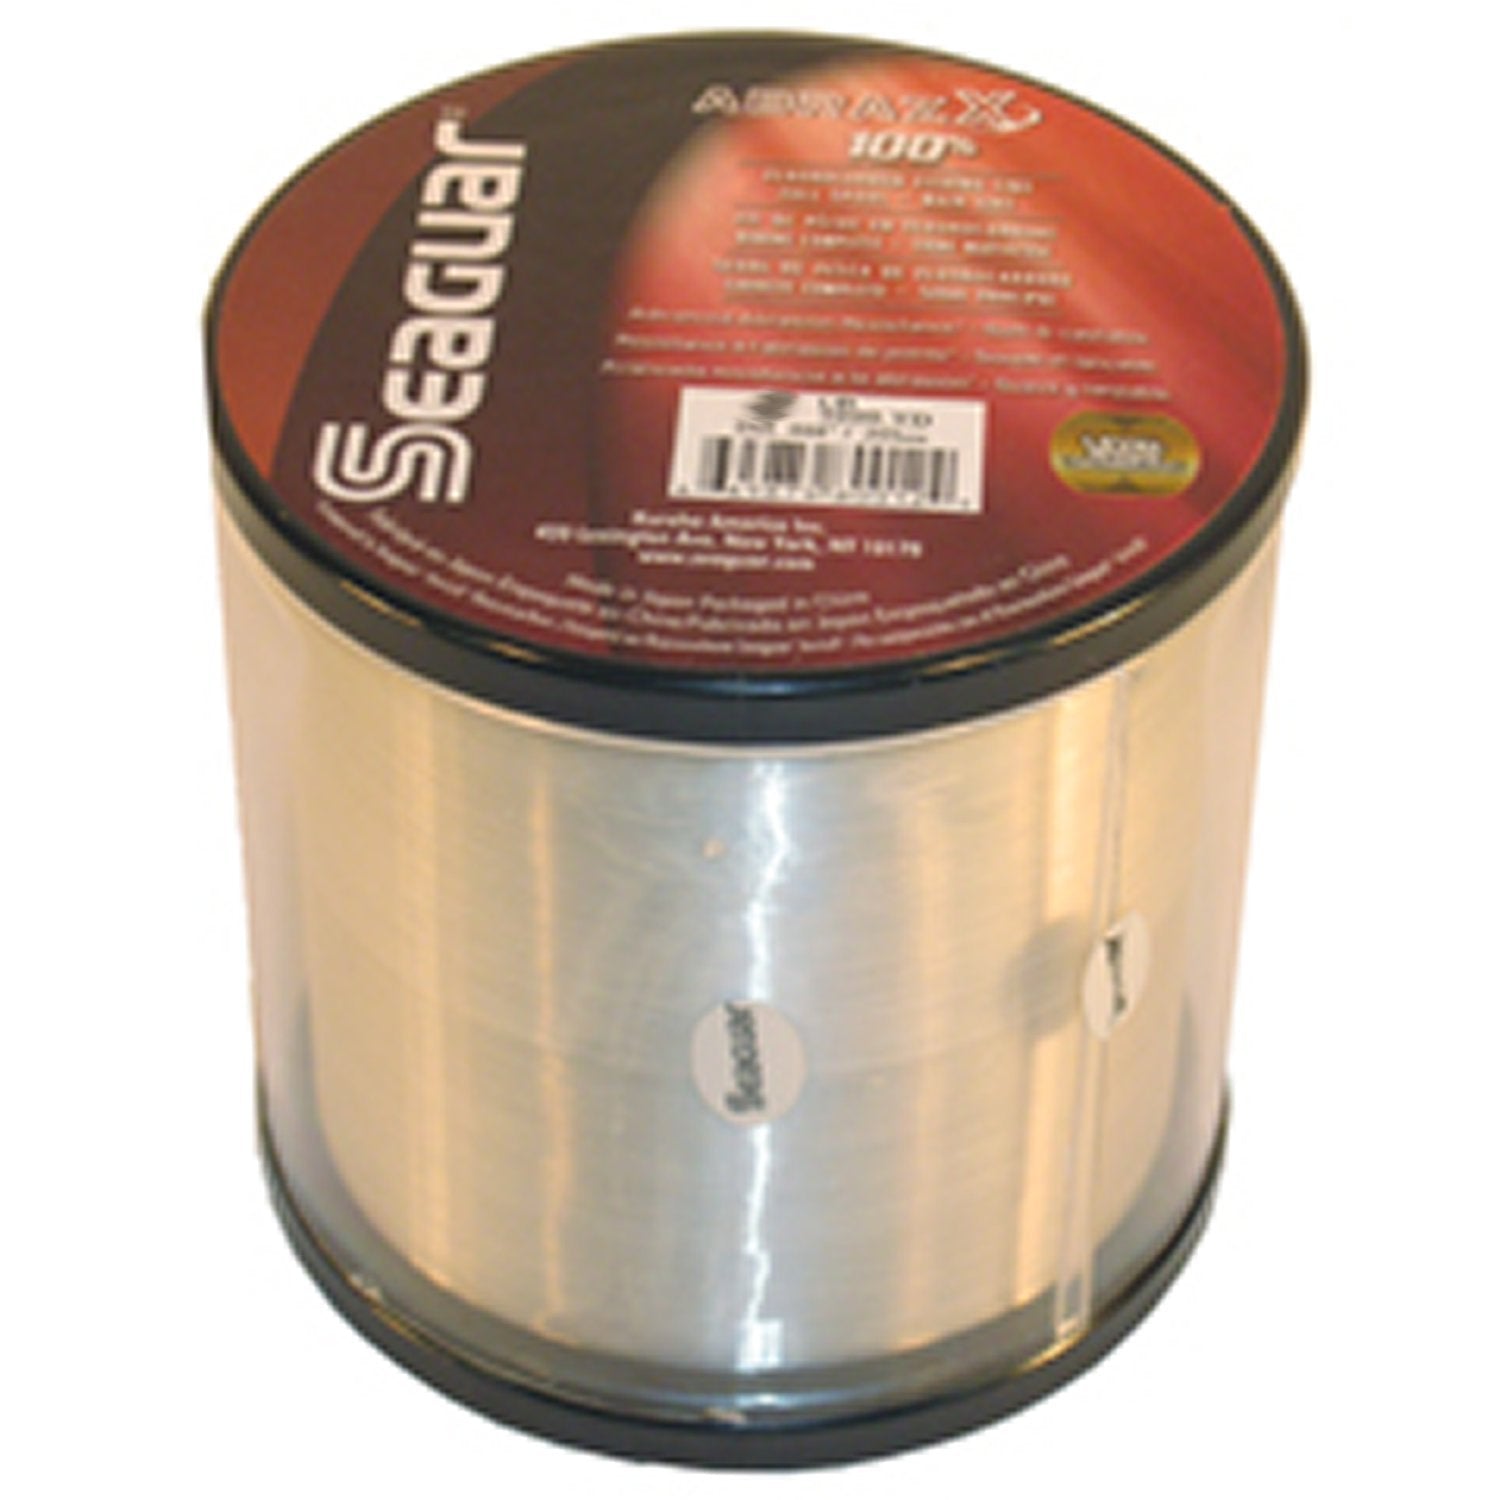 1000Yds 15LBS Seaguar Abrazx Fluorocarbon Fishing Line from Fish On Outlet